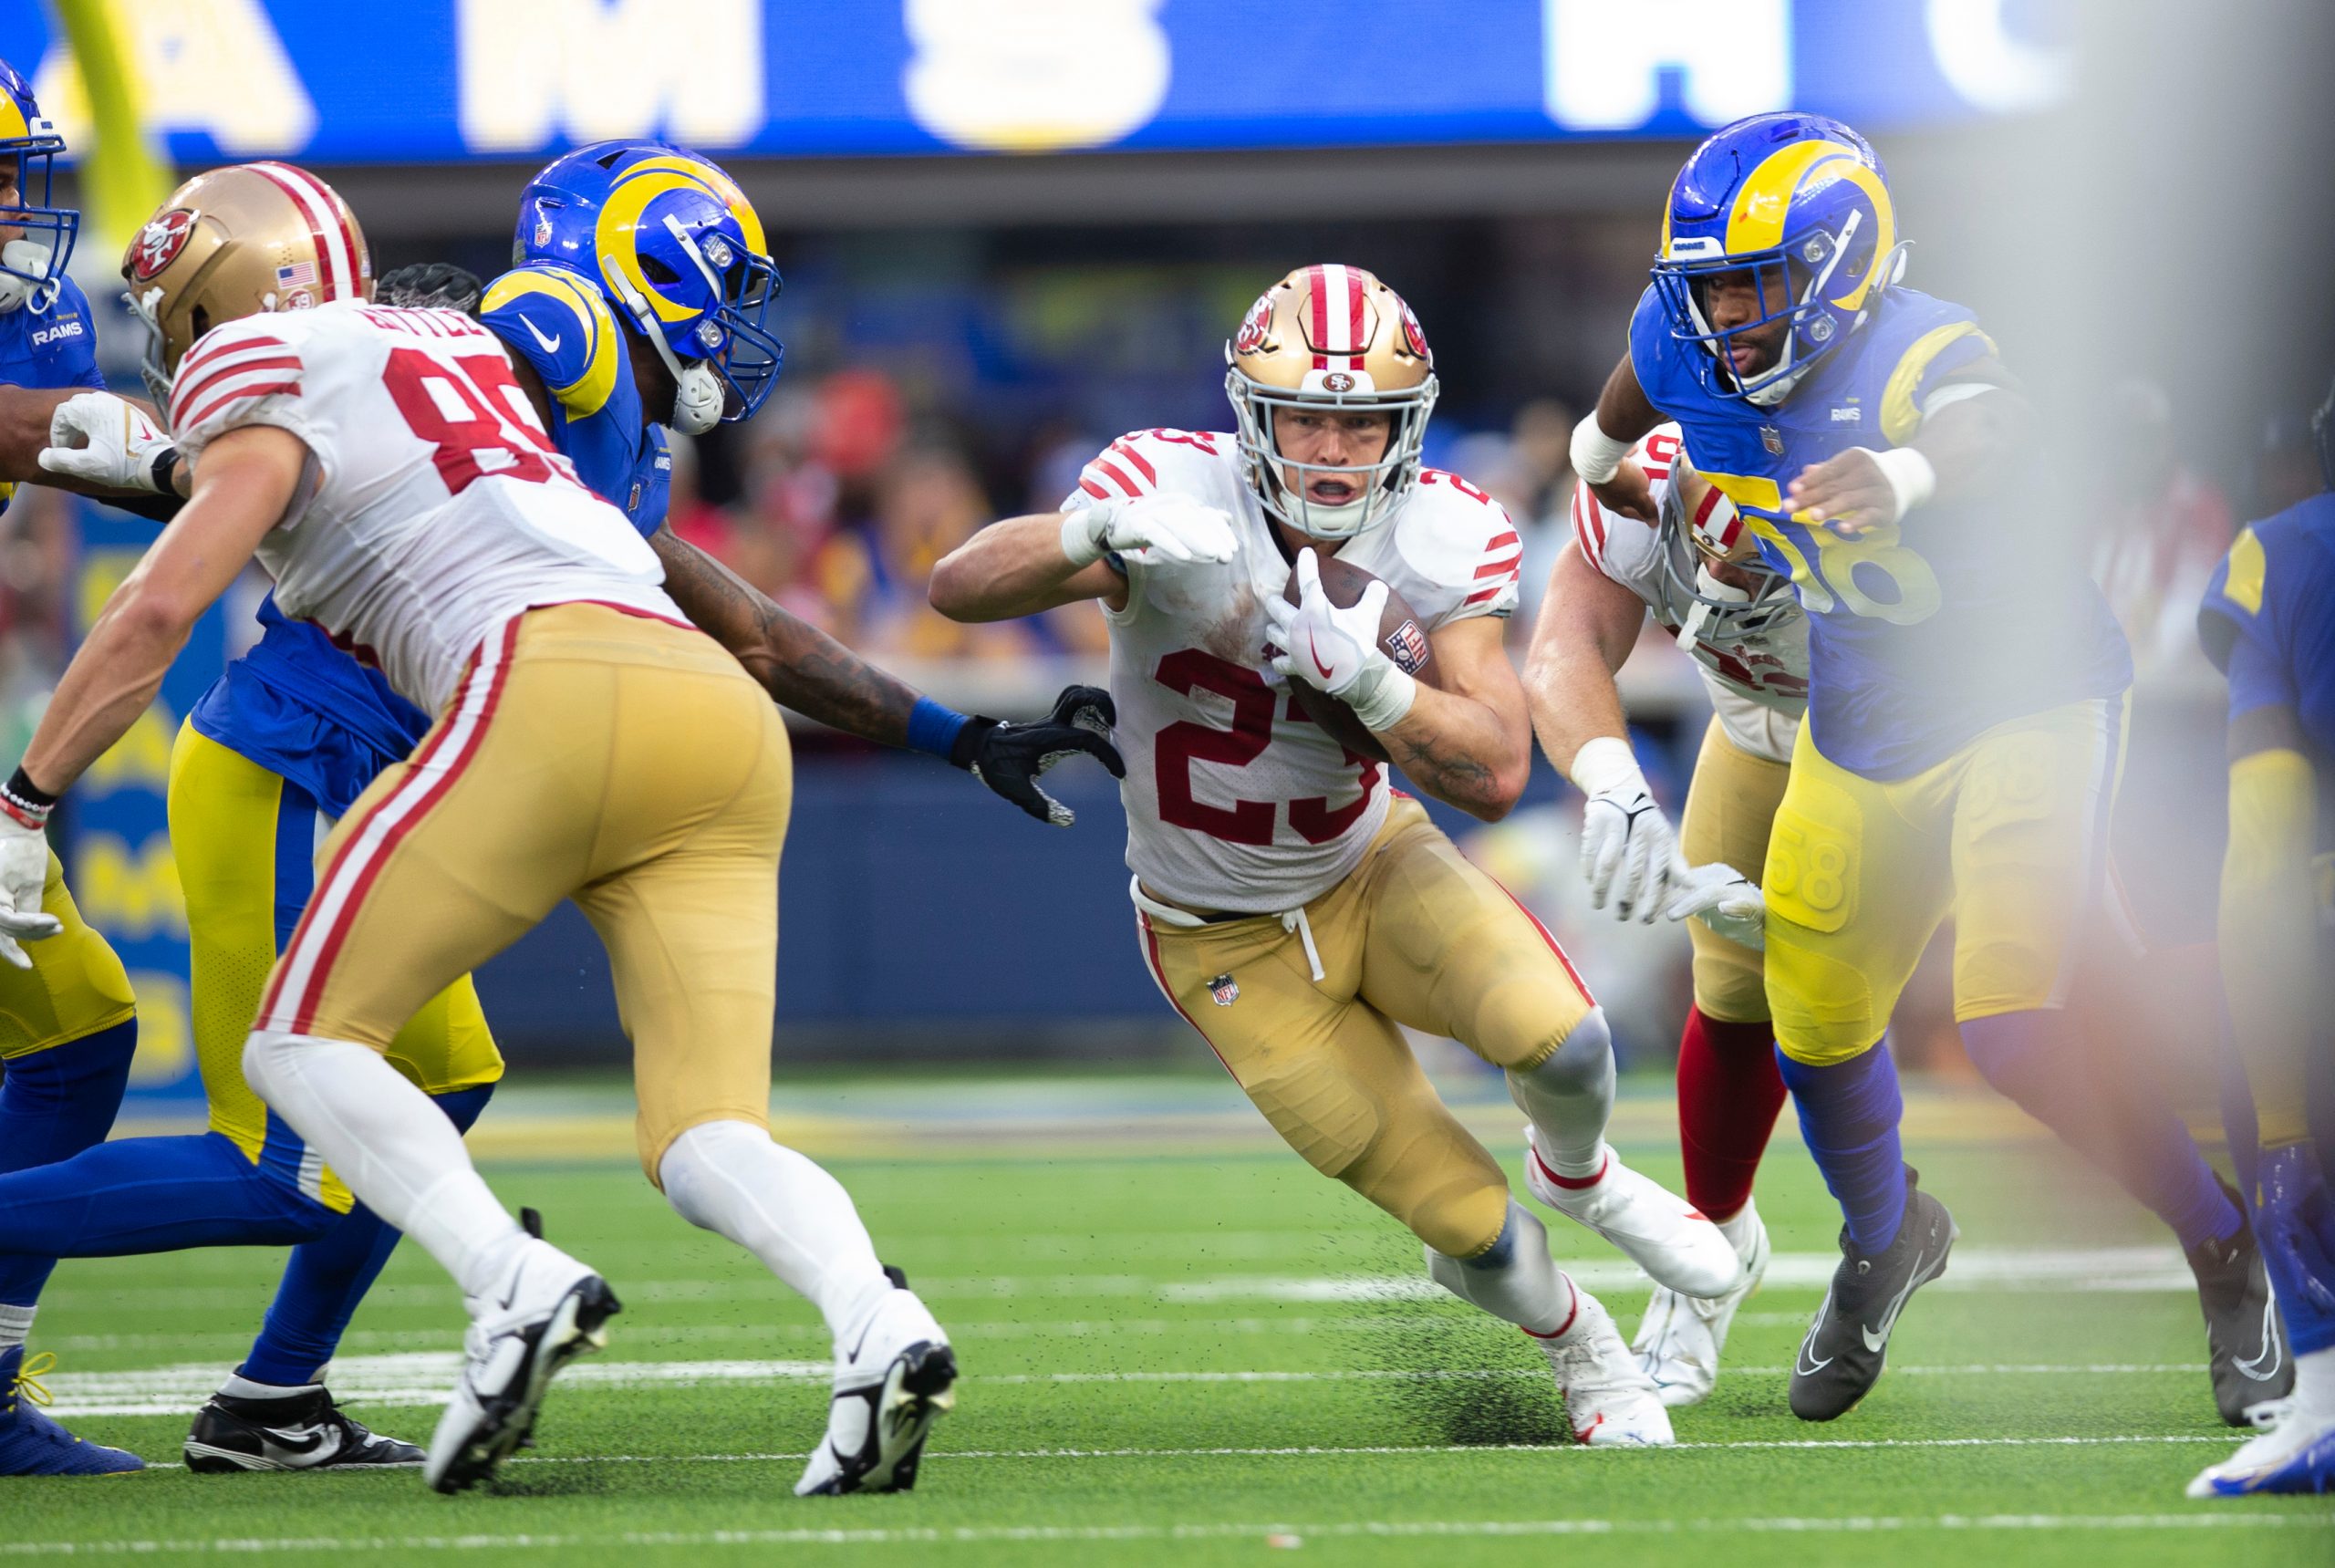 Christian McCaffrey #23 of the San Francisco 49ers rushes during the game against the Los Angeles R...